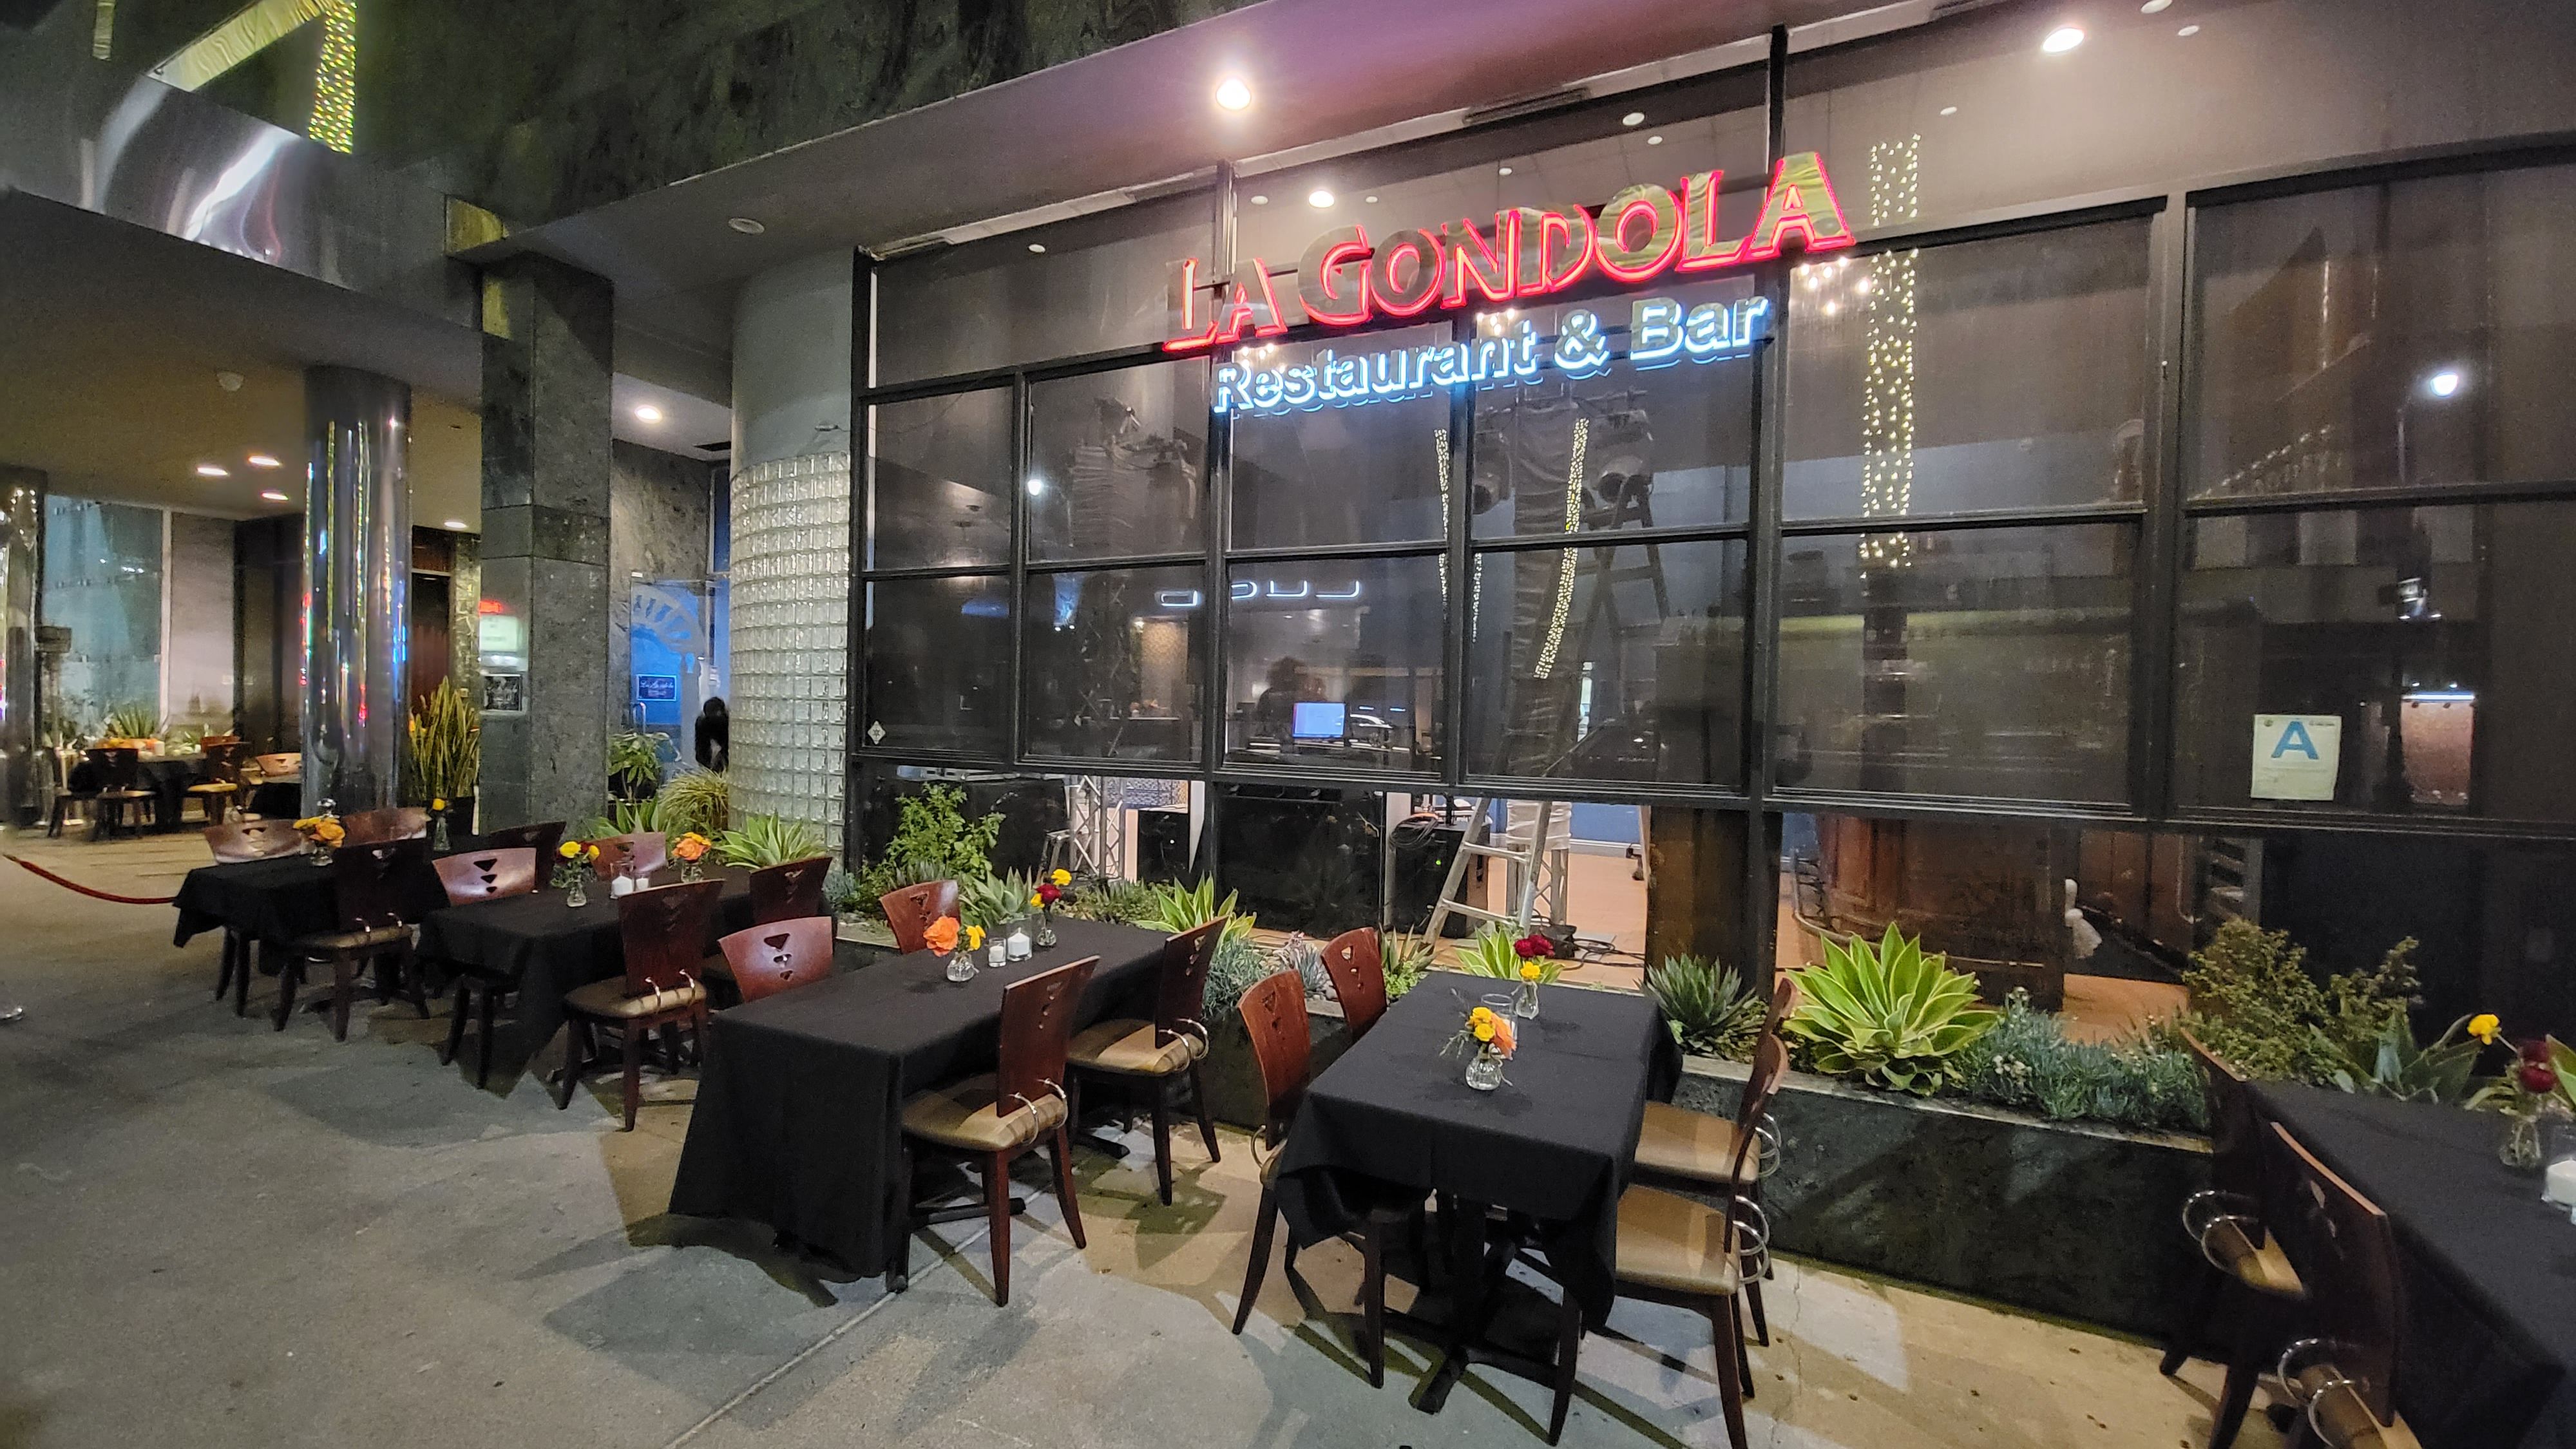 La Gondola is a kosher Italian restaurant in Beverly Hills that has been open for almost 30 years.